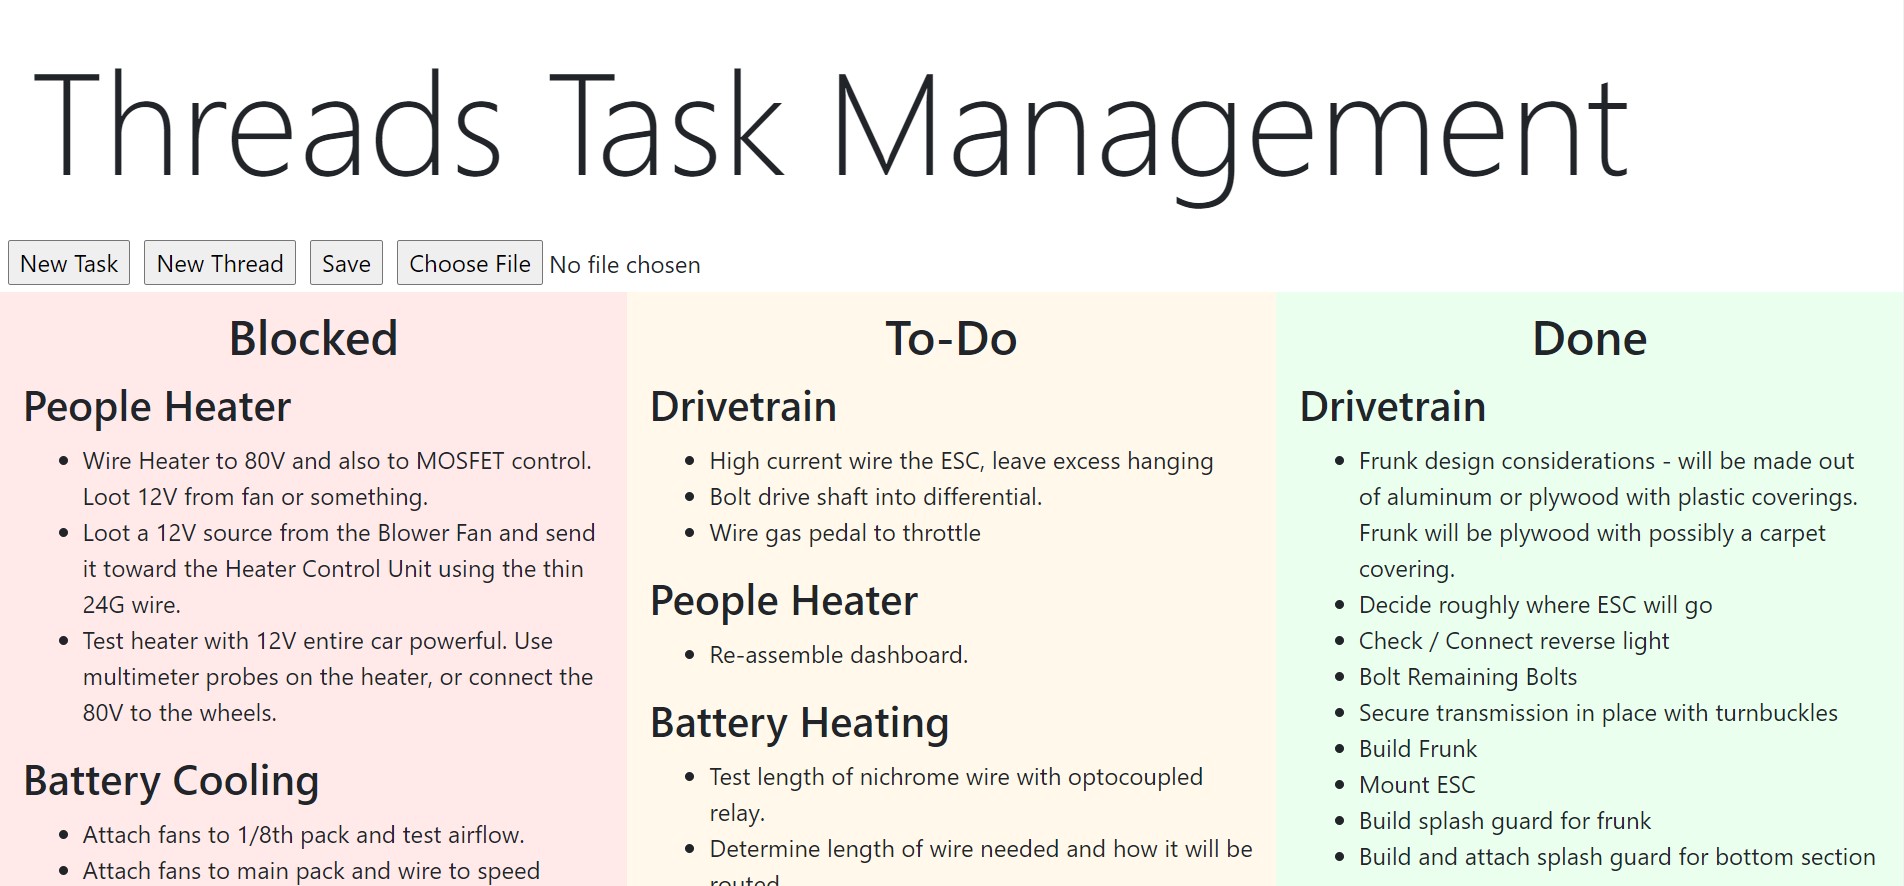 Threads Task Manager